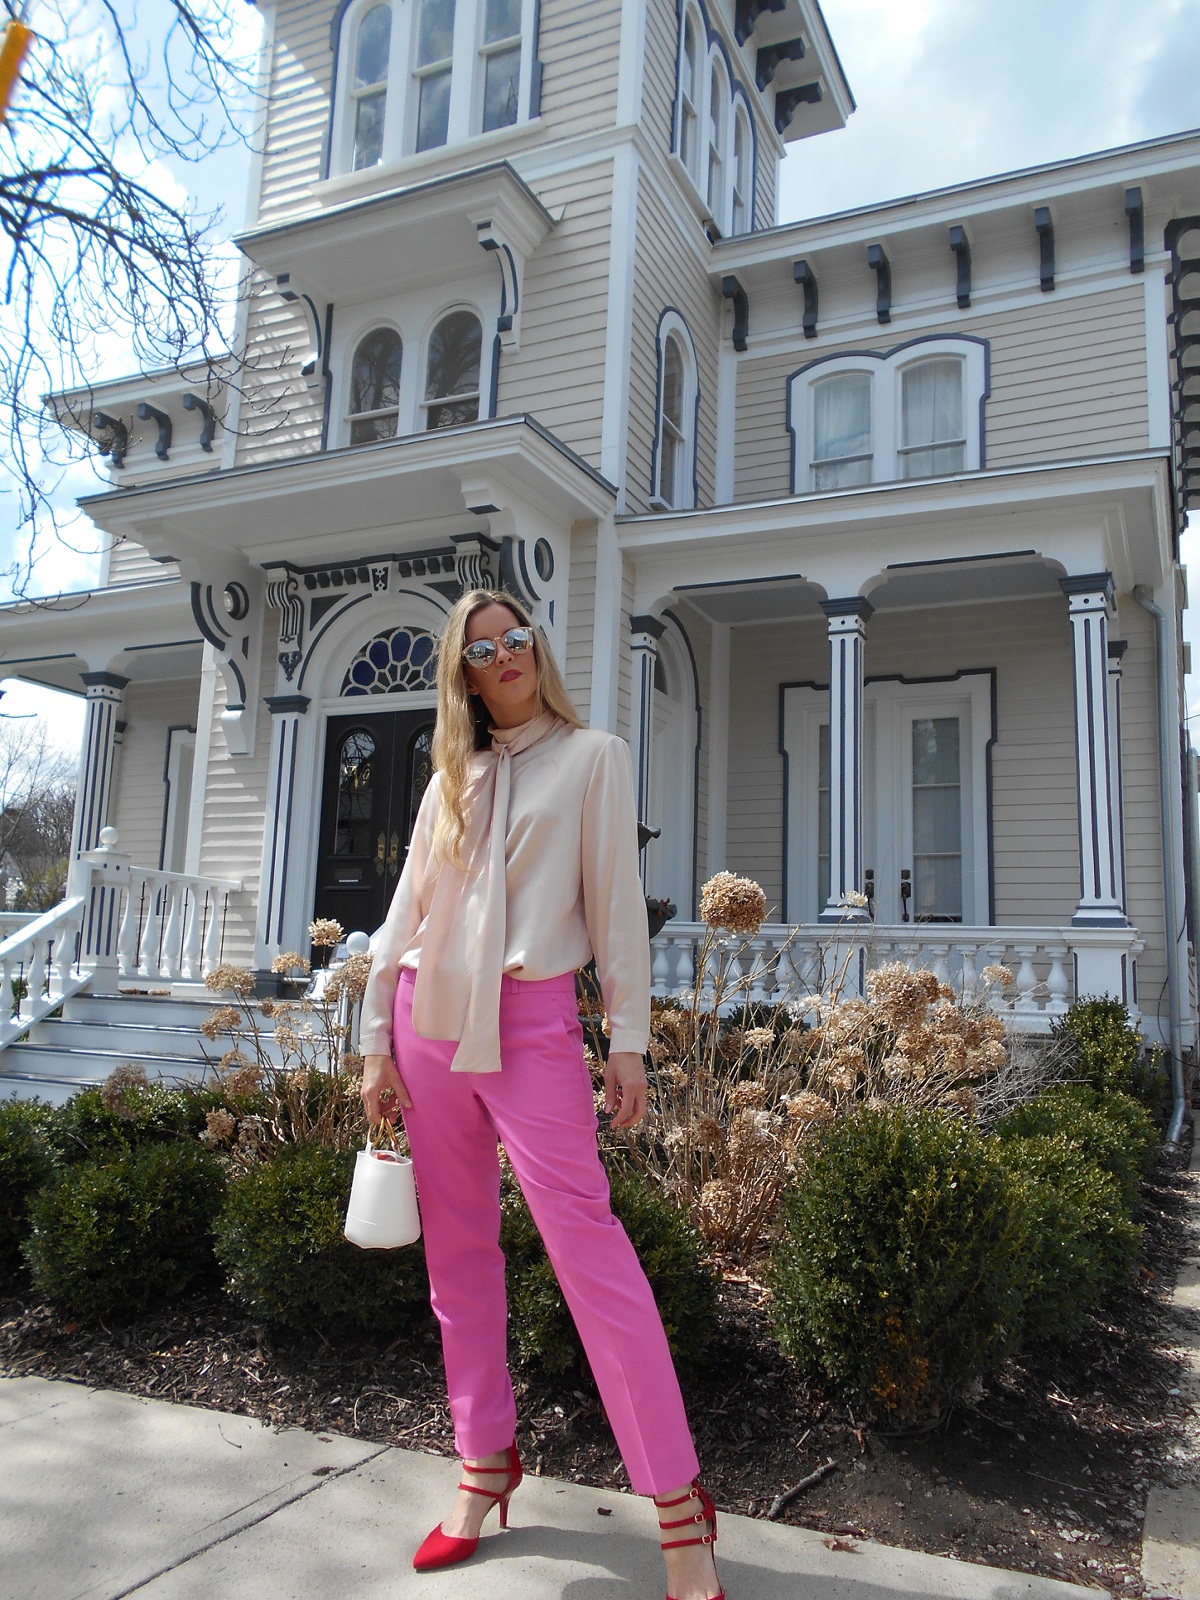 Champagne and Tweed: Shades of Pink for Spring